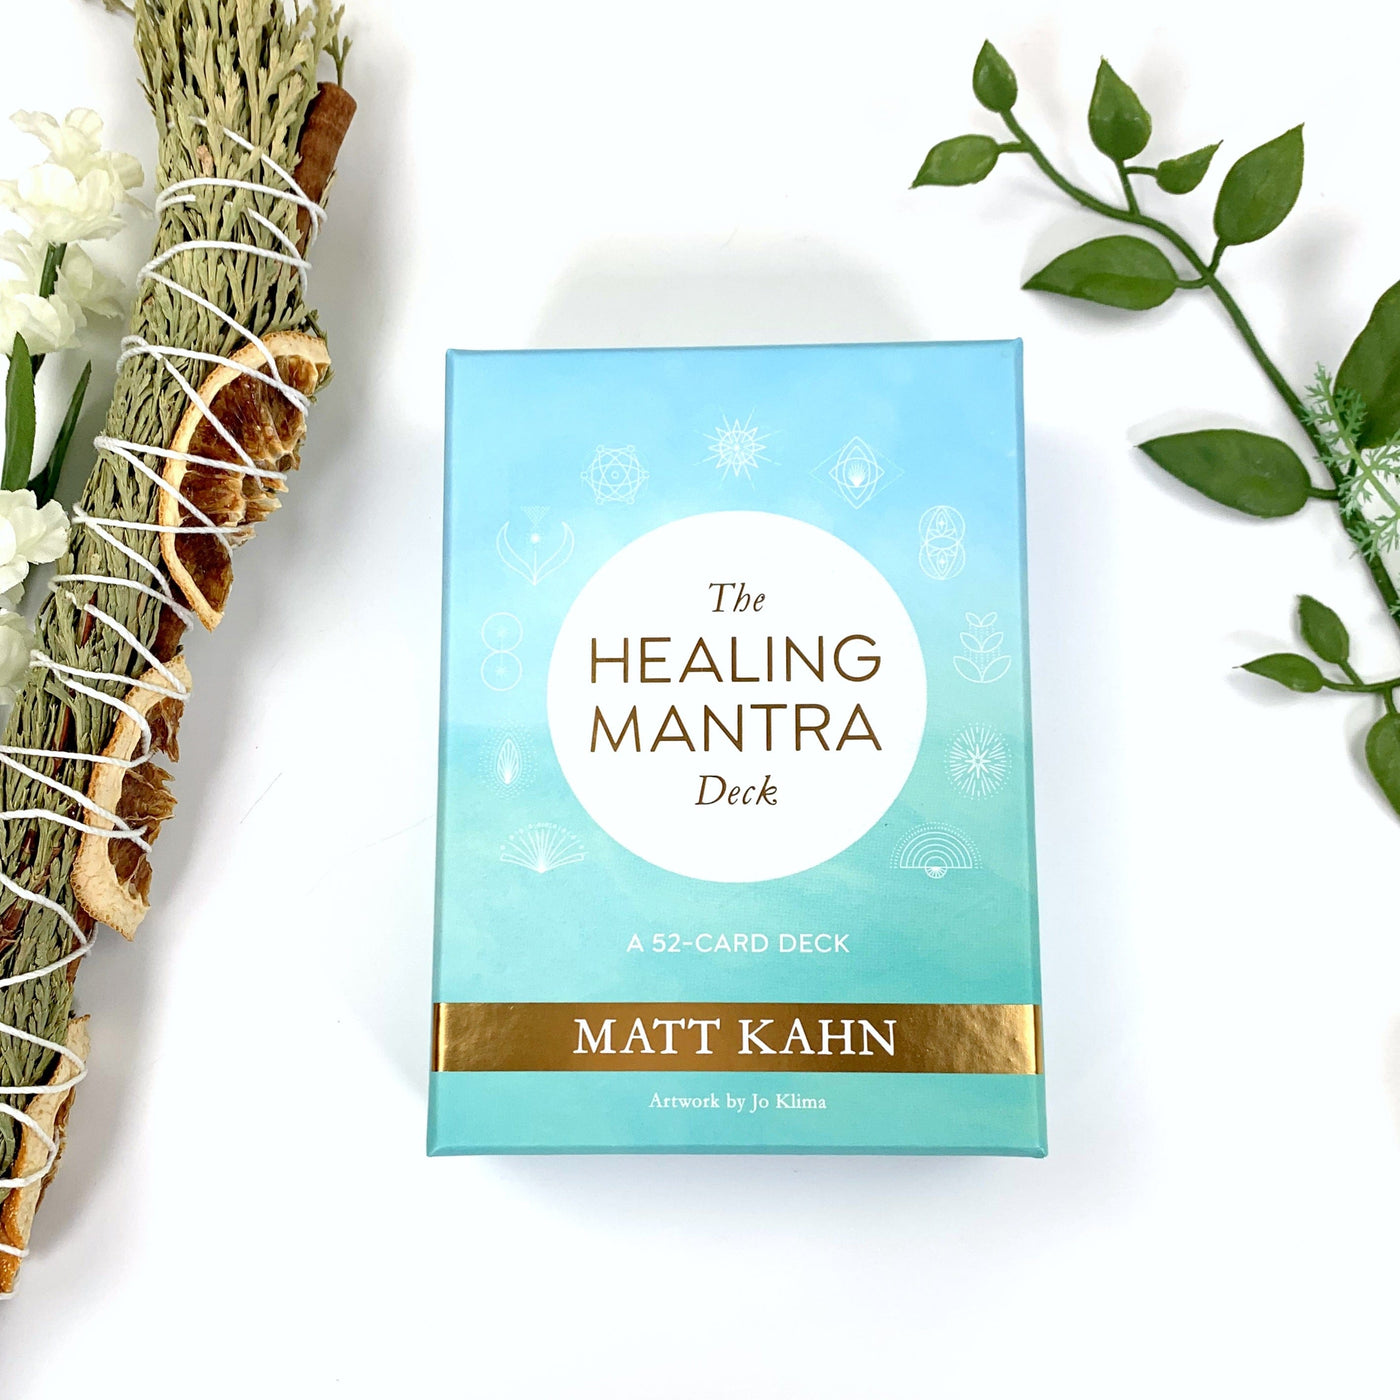 The front of the  The Healing Mantra Deck  box in a teal blue color